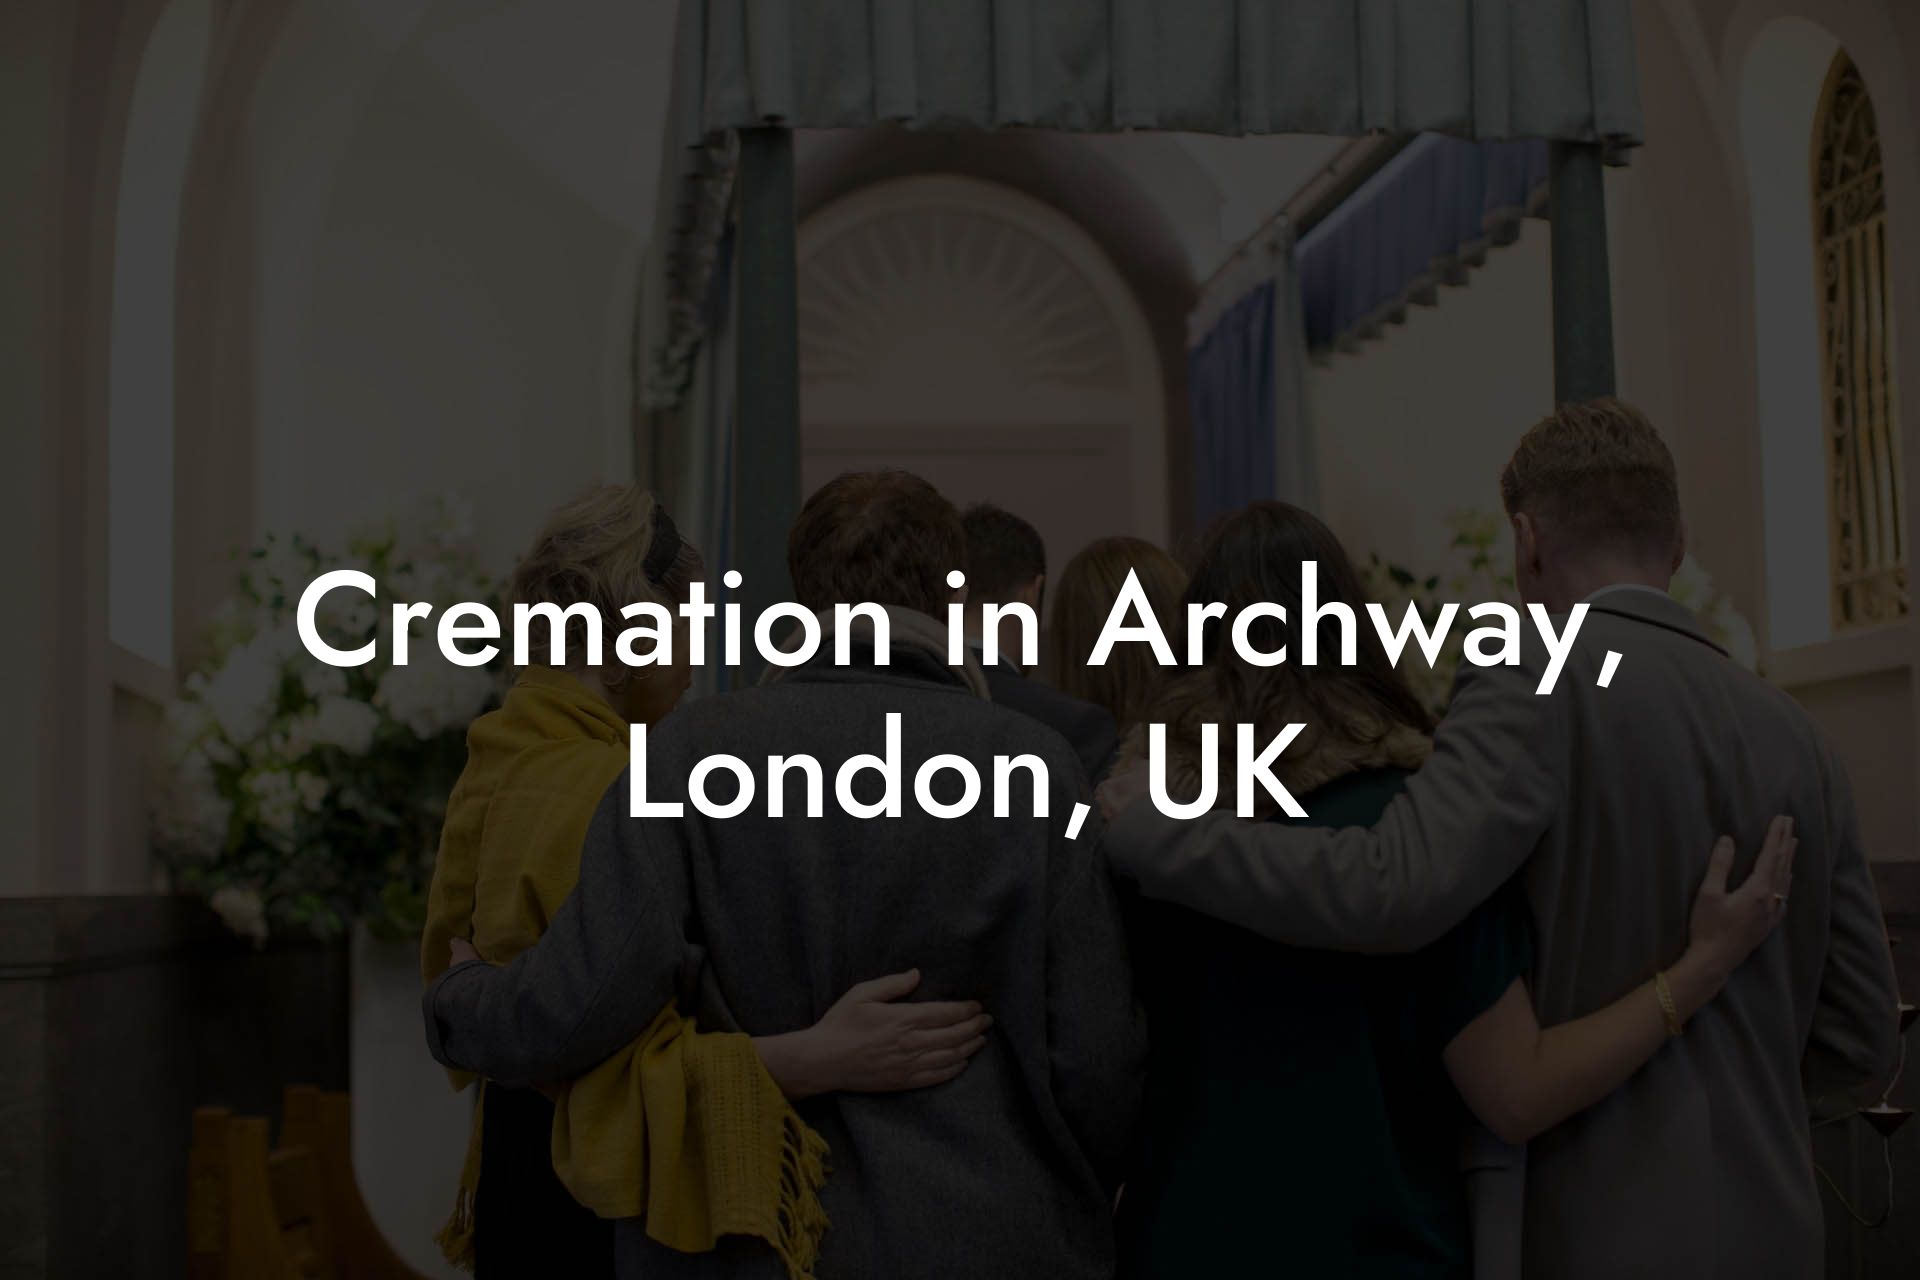 Cremation in Archway, London, UK